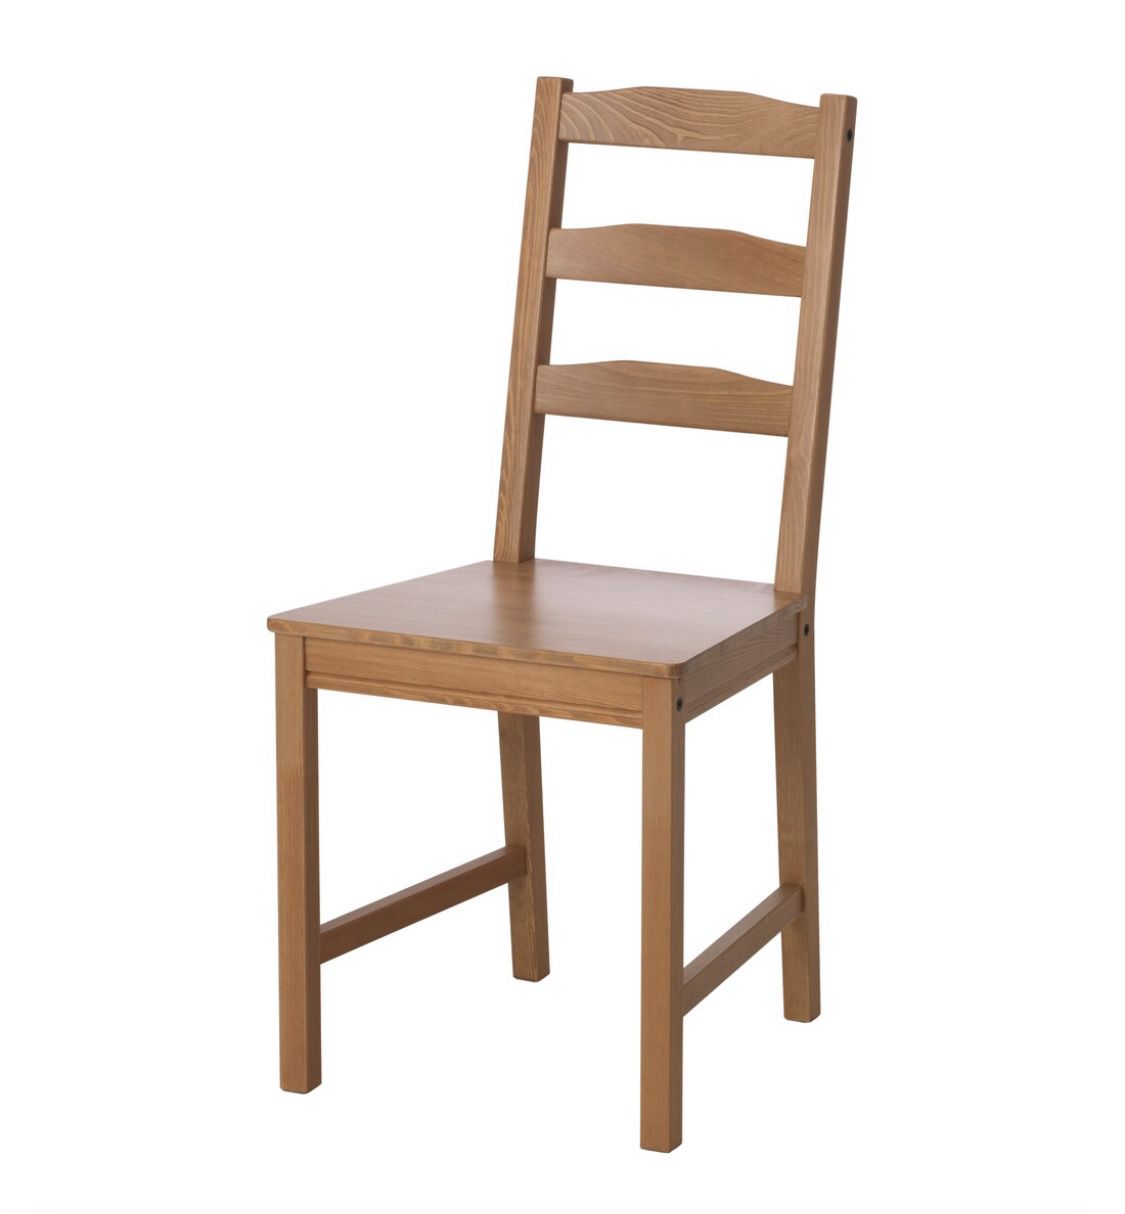 4 Solid Pine Chairs